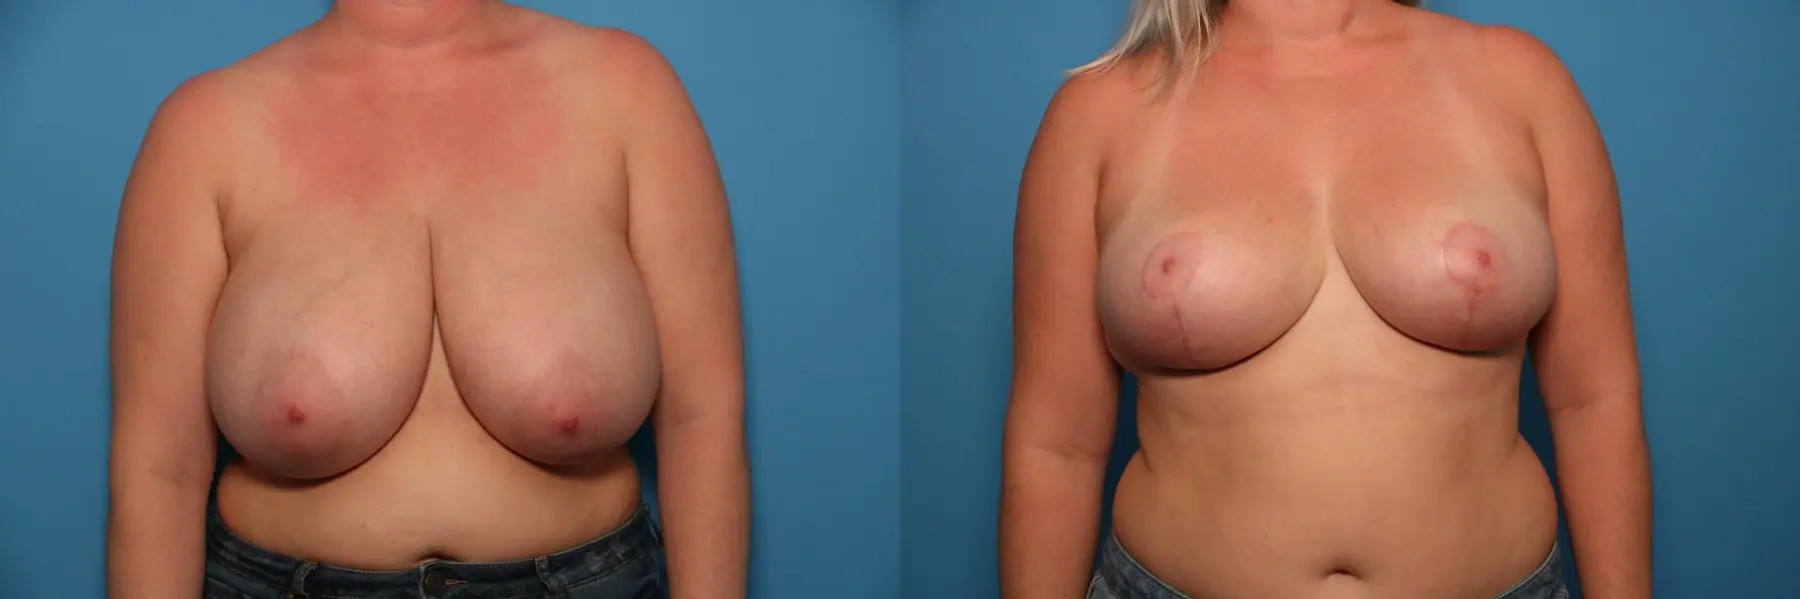 Breast Lift-Reduction: Patient 3 - Before and After  